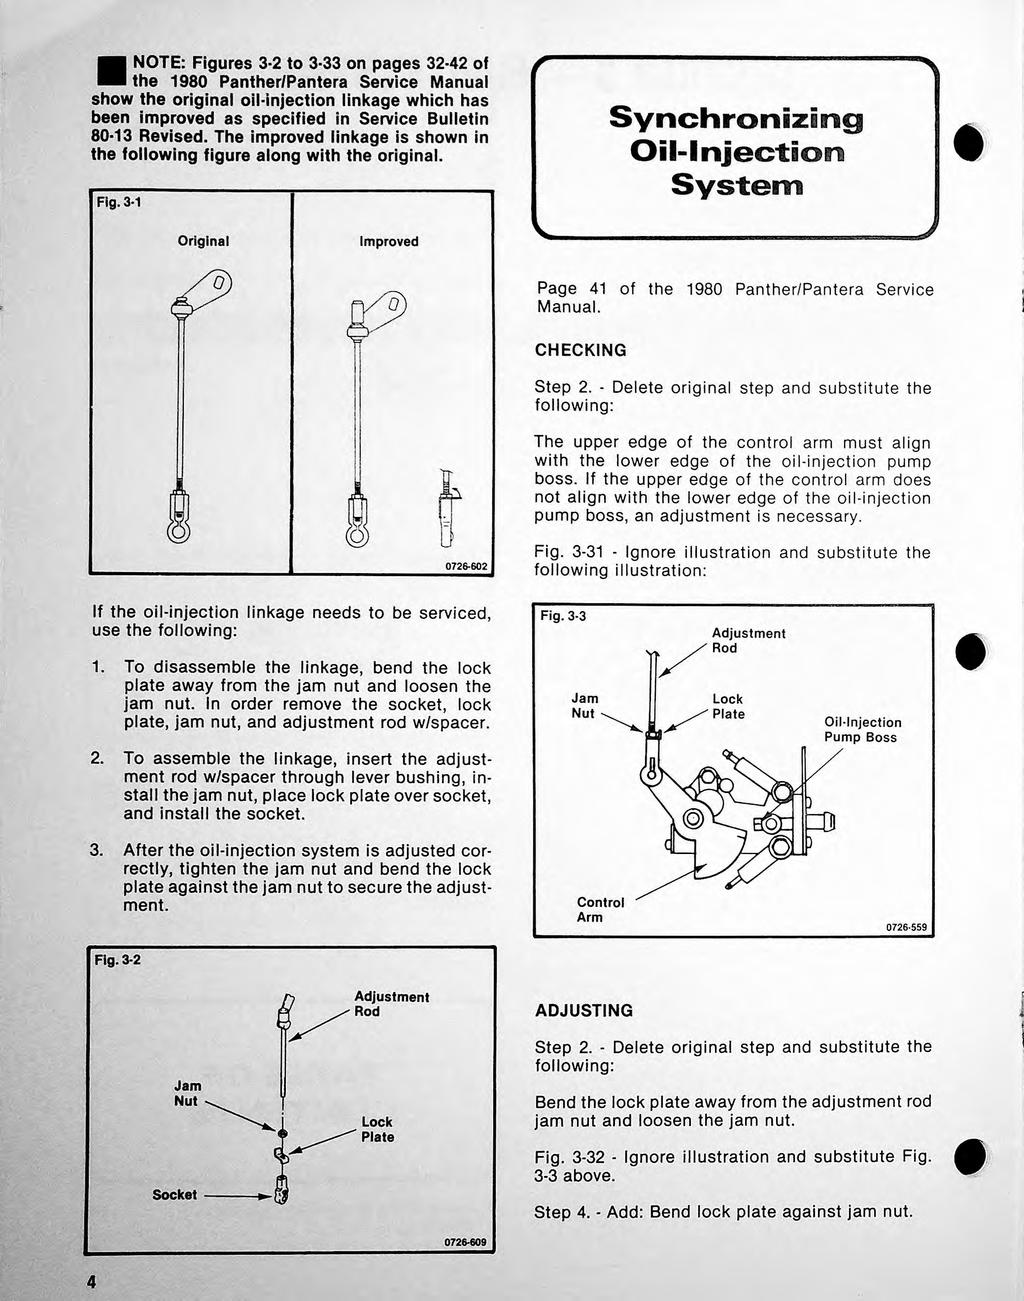 NOTE: Figures 3 2 to 3.33 on pages 32-42 of the 1980 Panther/Pantera Service Manua show the origina oi-injection inkage which has been improved as specified in Service Buetin 80 13 Revised.